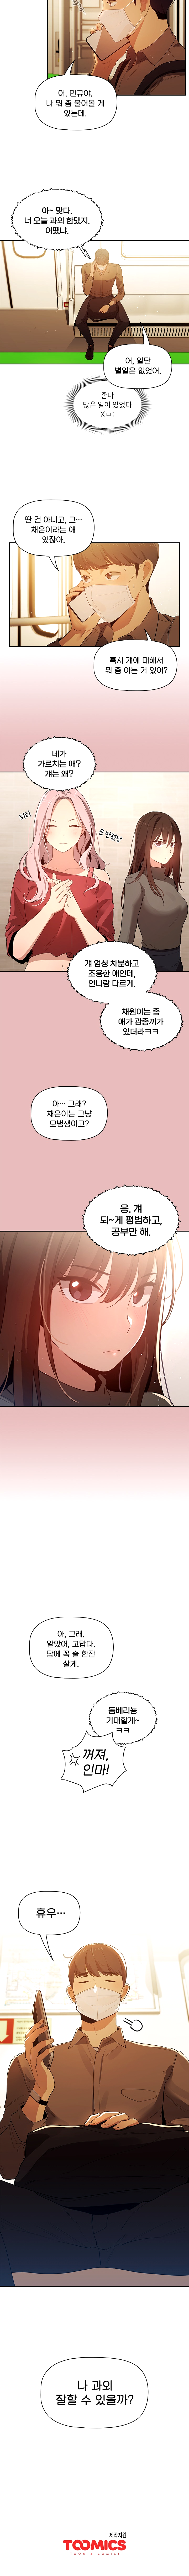 private-tutoring-in-pandemic-raw-chap-2-3